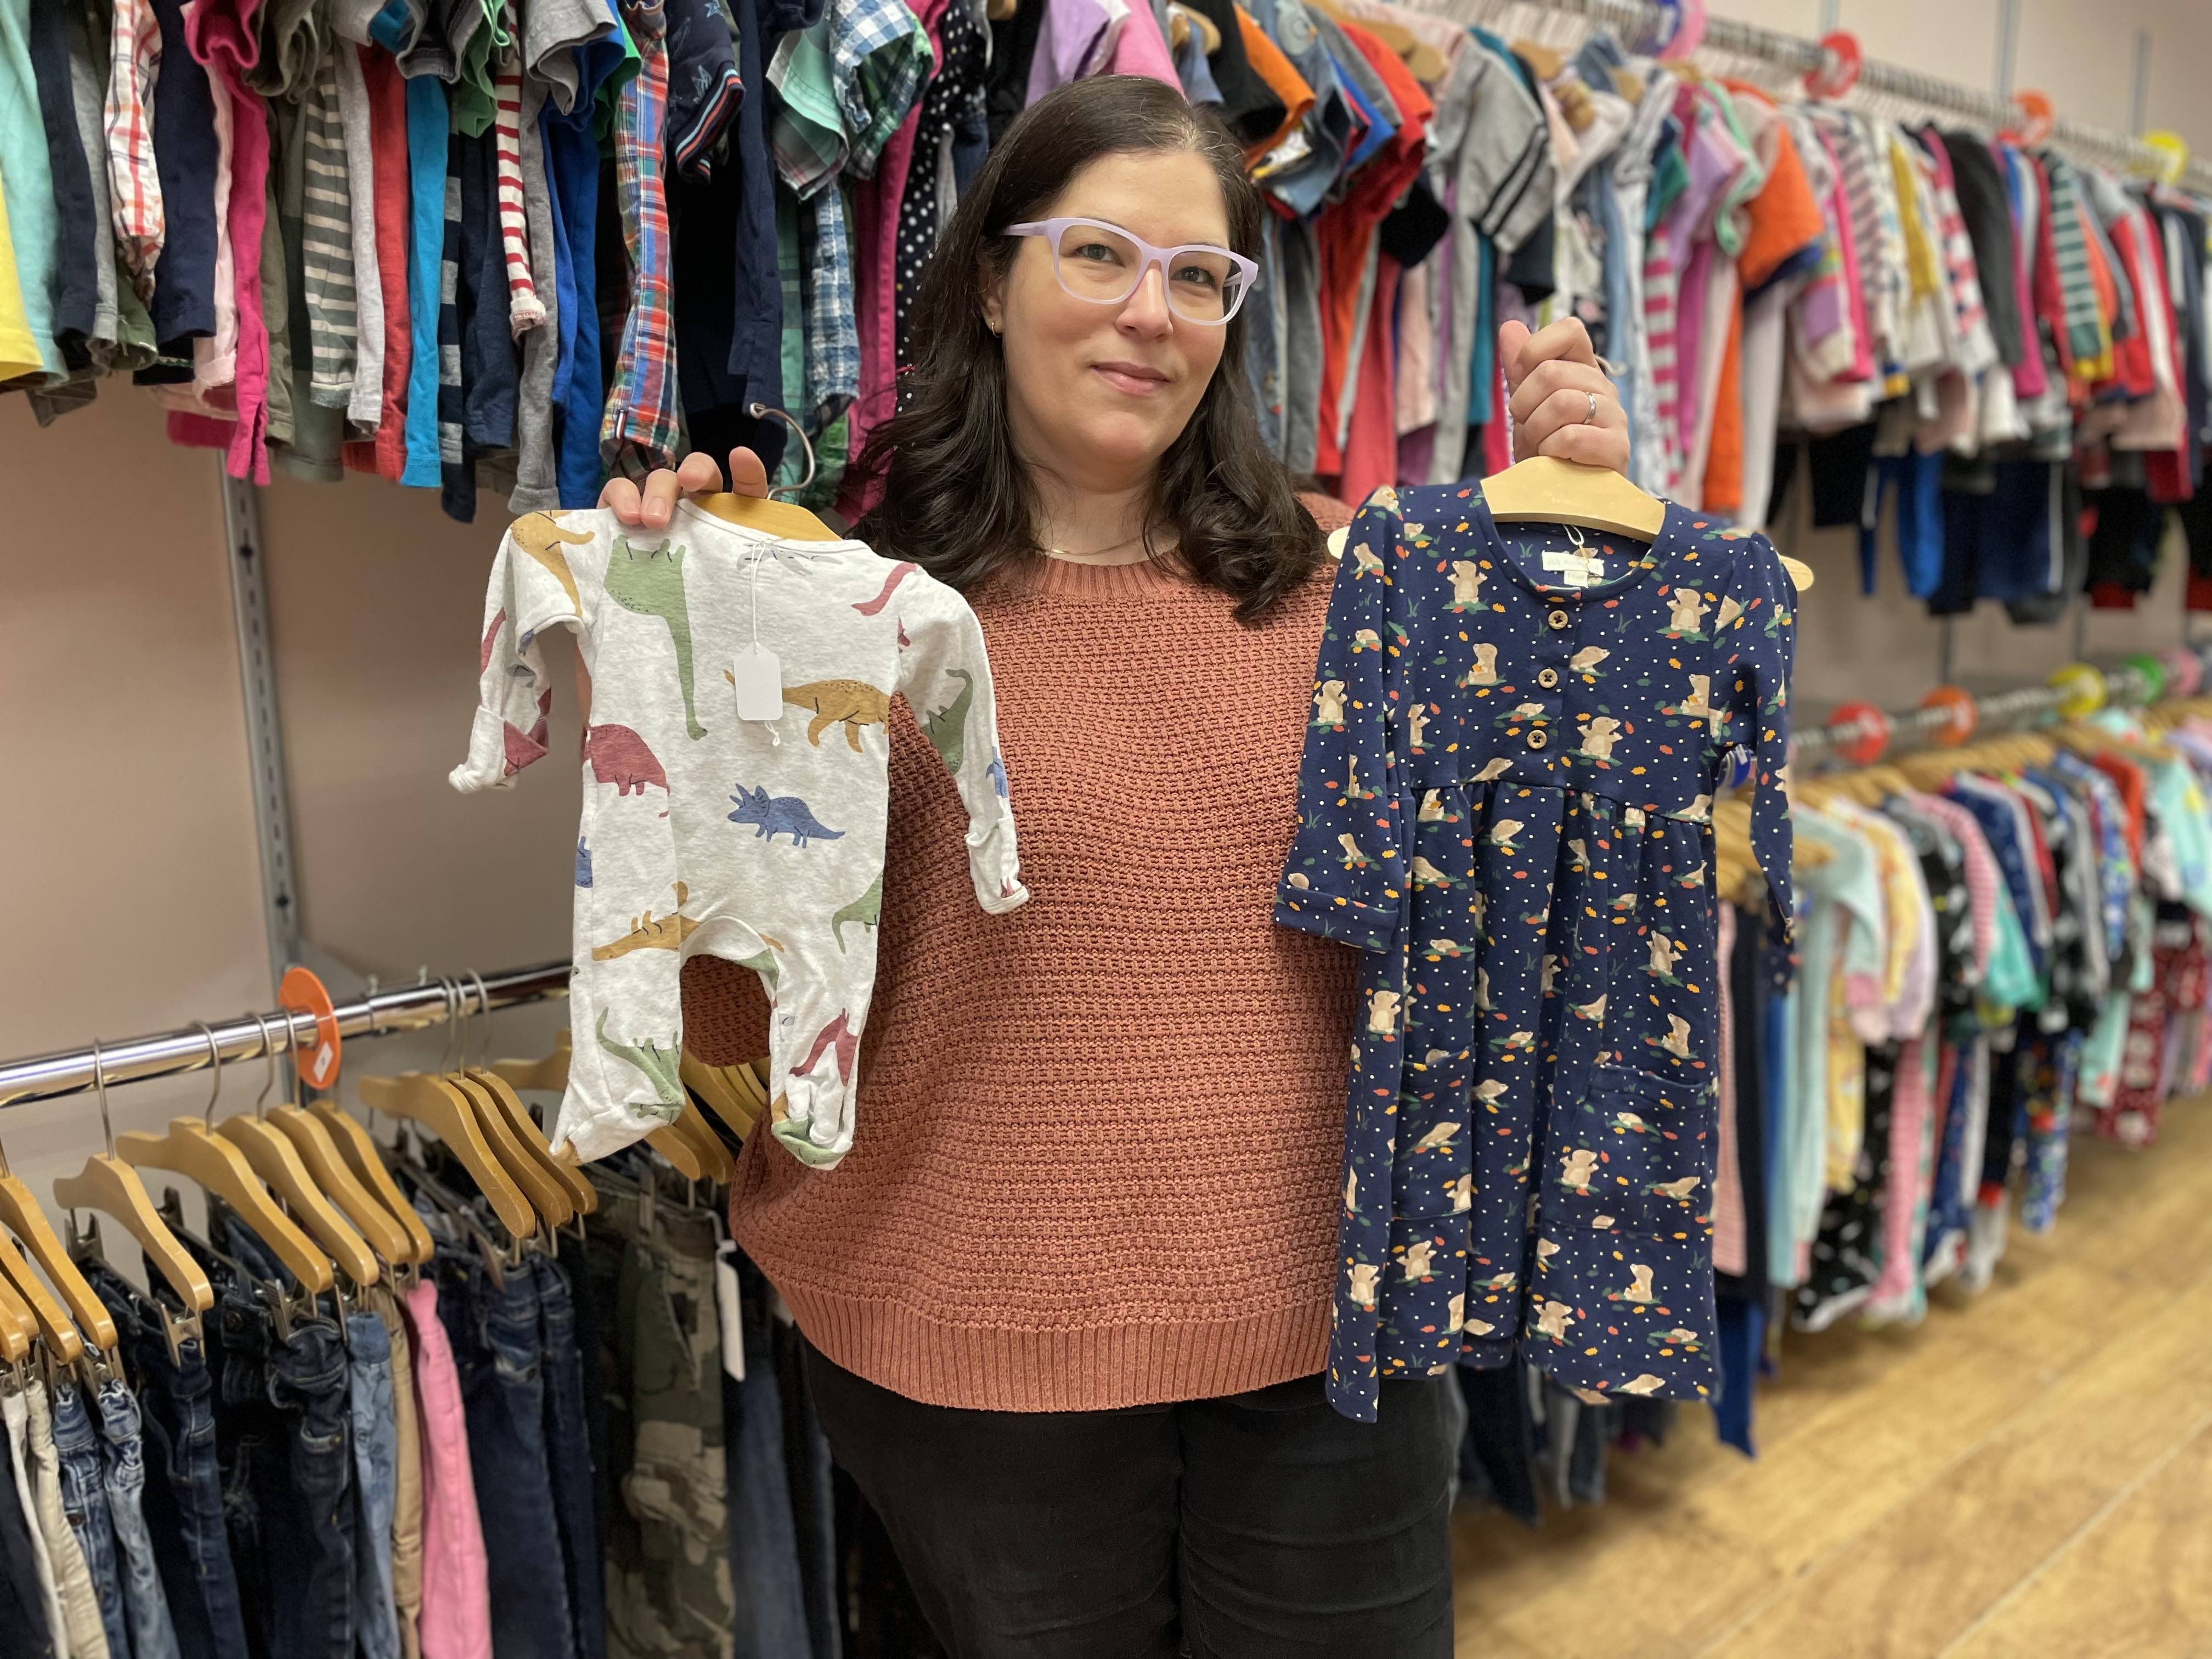 Much-needed' gently used kids' clothing store opens downtown - Orillia News